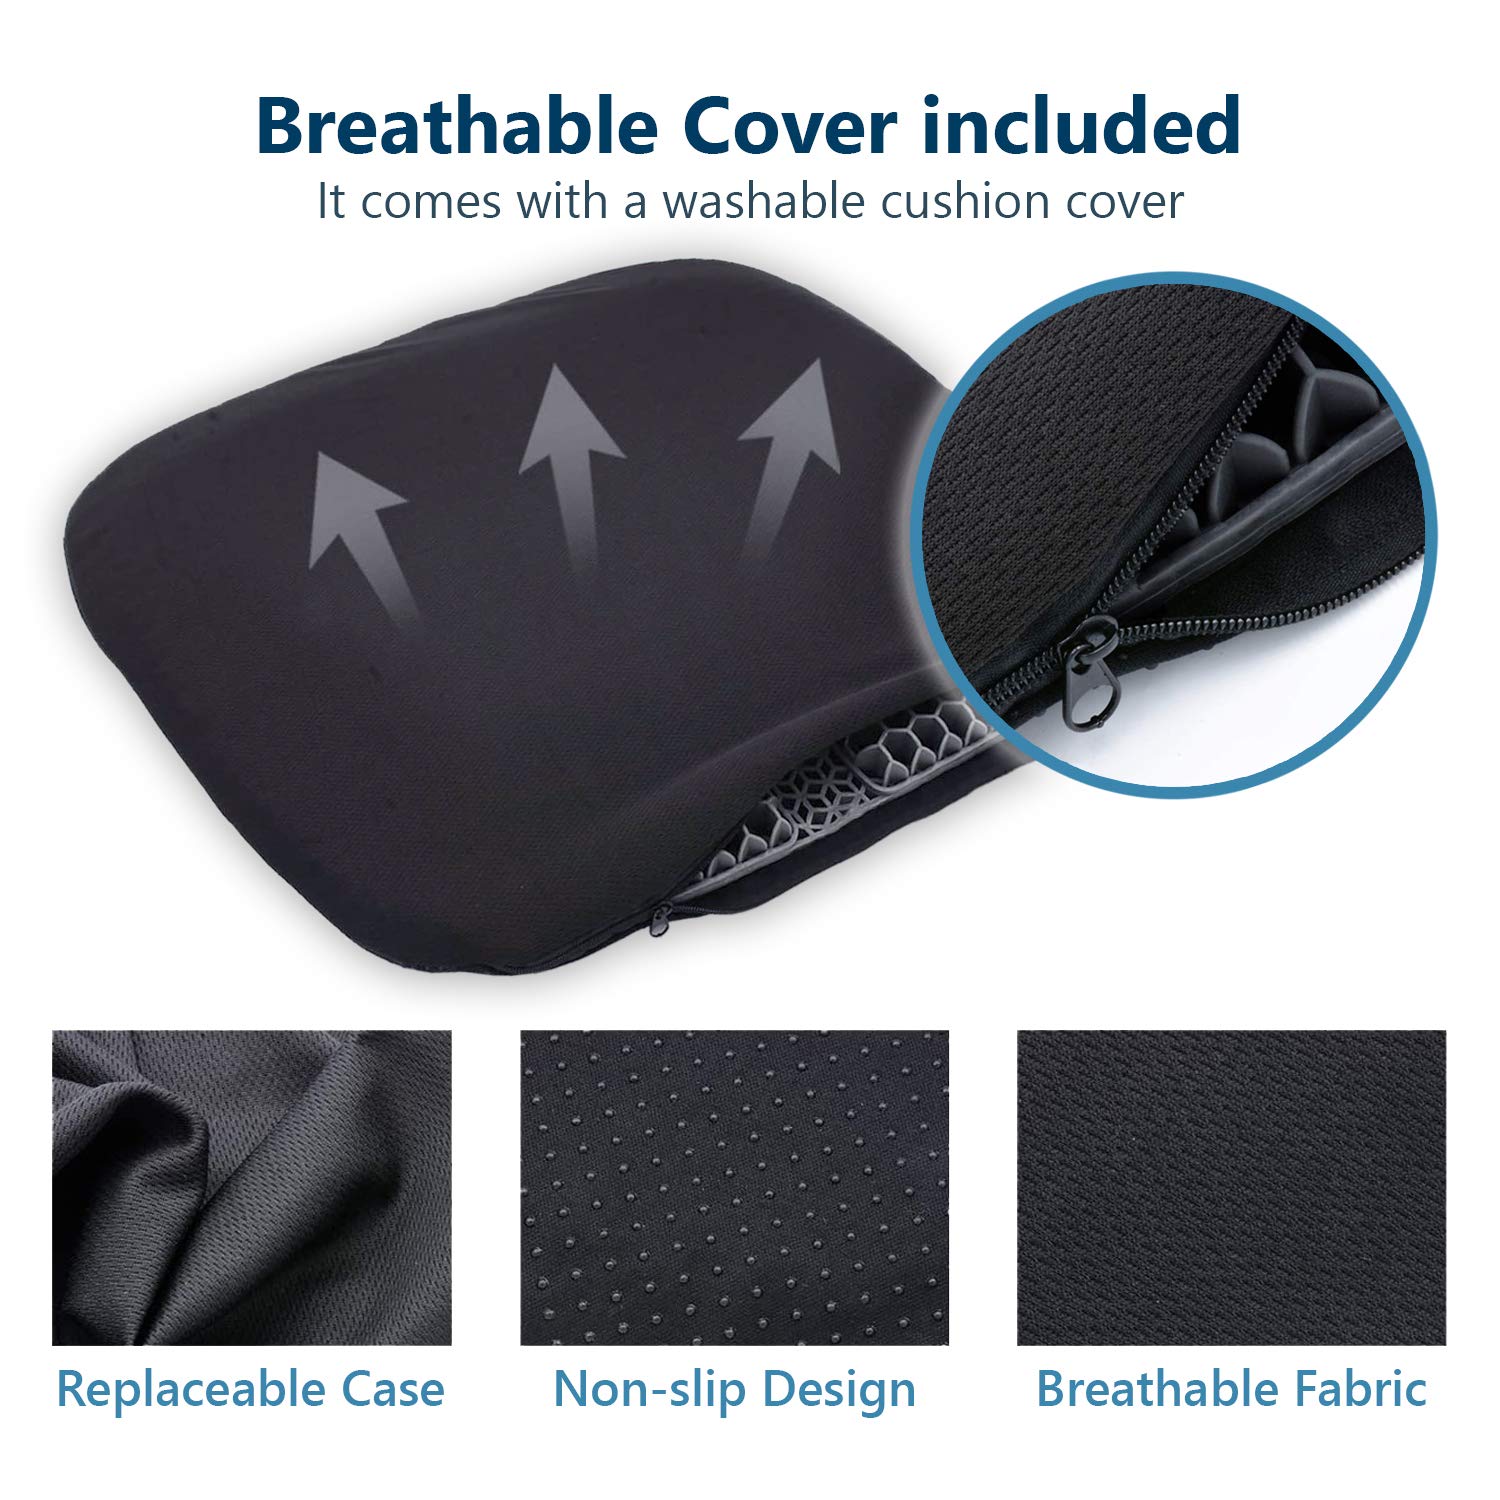 Gel Seat Cushion, Double Thick Enhanced Honeycomb Design Cushion with Non-Slip Breathable Cover for Pressure Relief & Tailbone Pain, fits Computer, Office, Car & Wheelchair Chair (18 x 17 x 1.3 in)